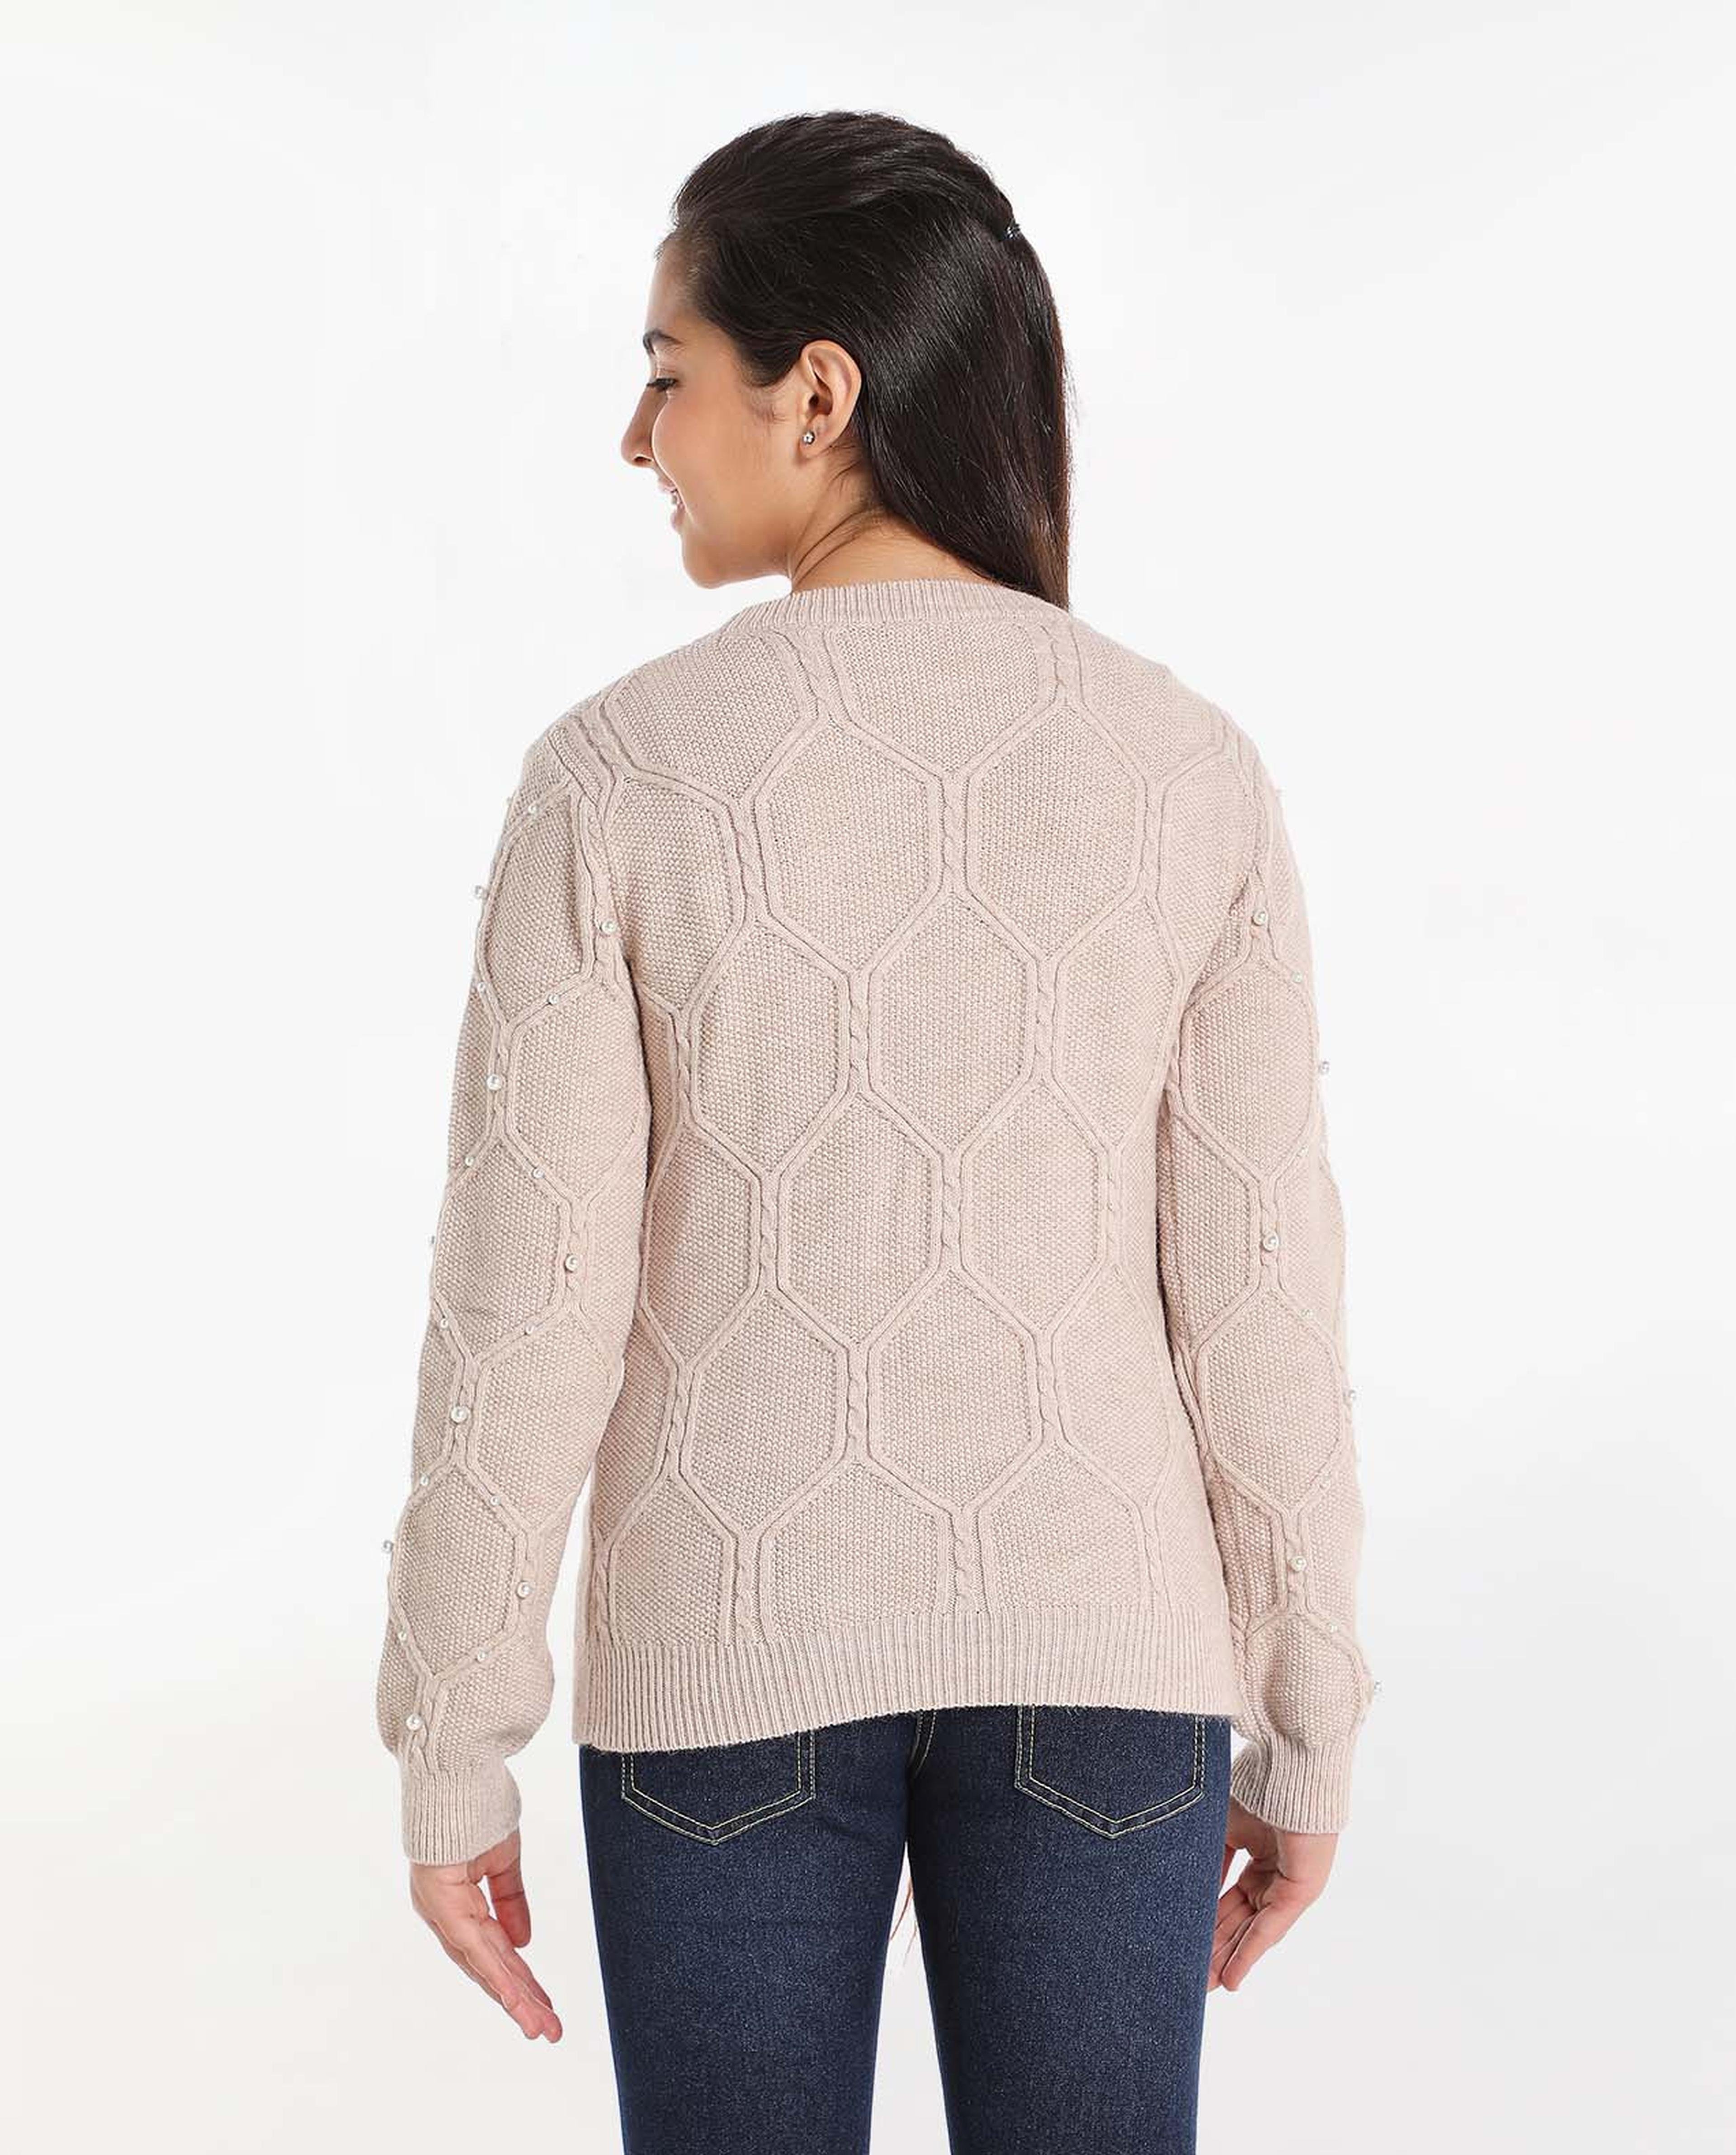 Pearl Embellished Sweater with Round Neck and Full Sleeves